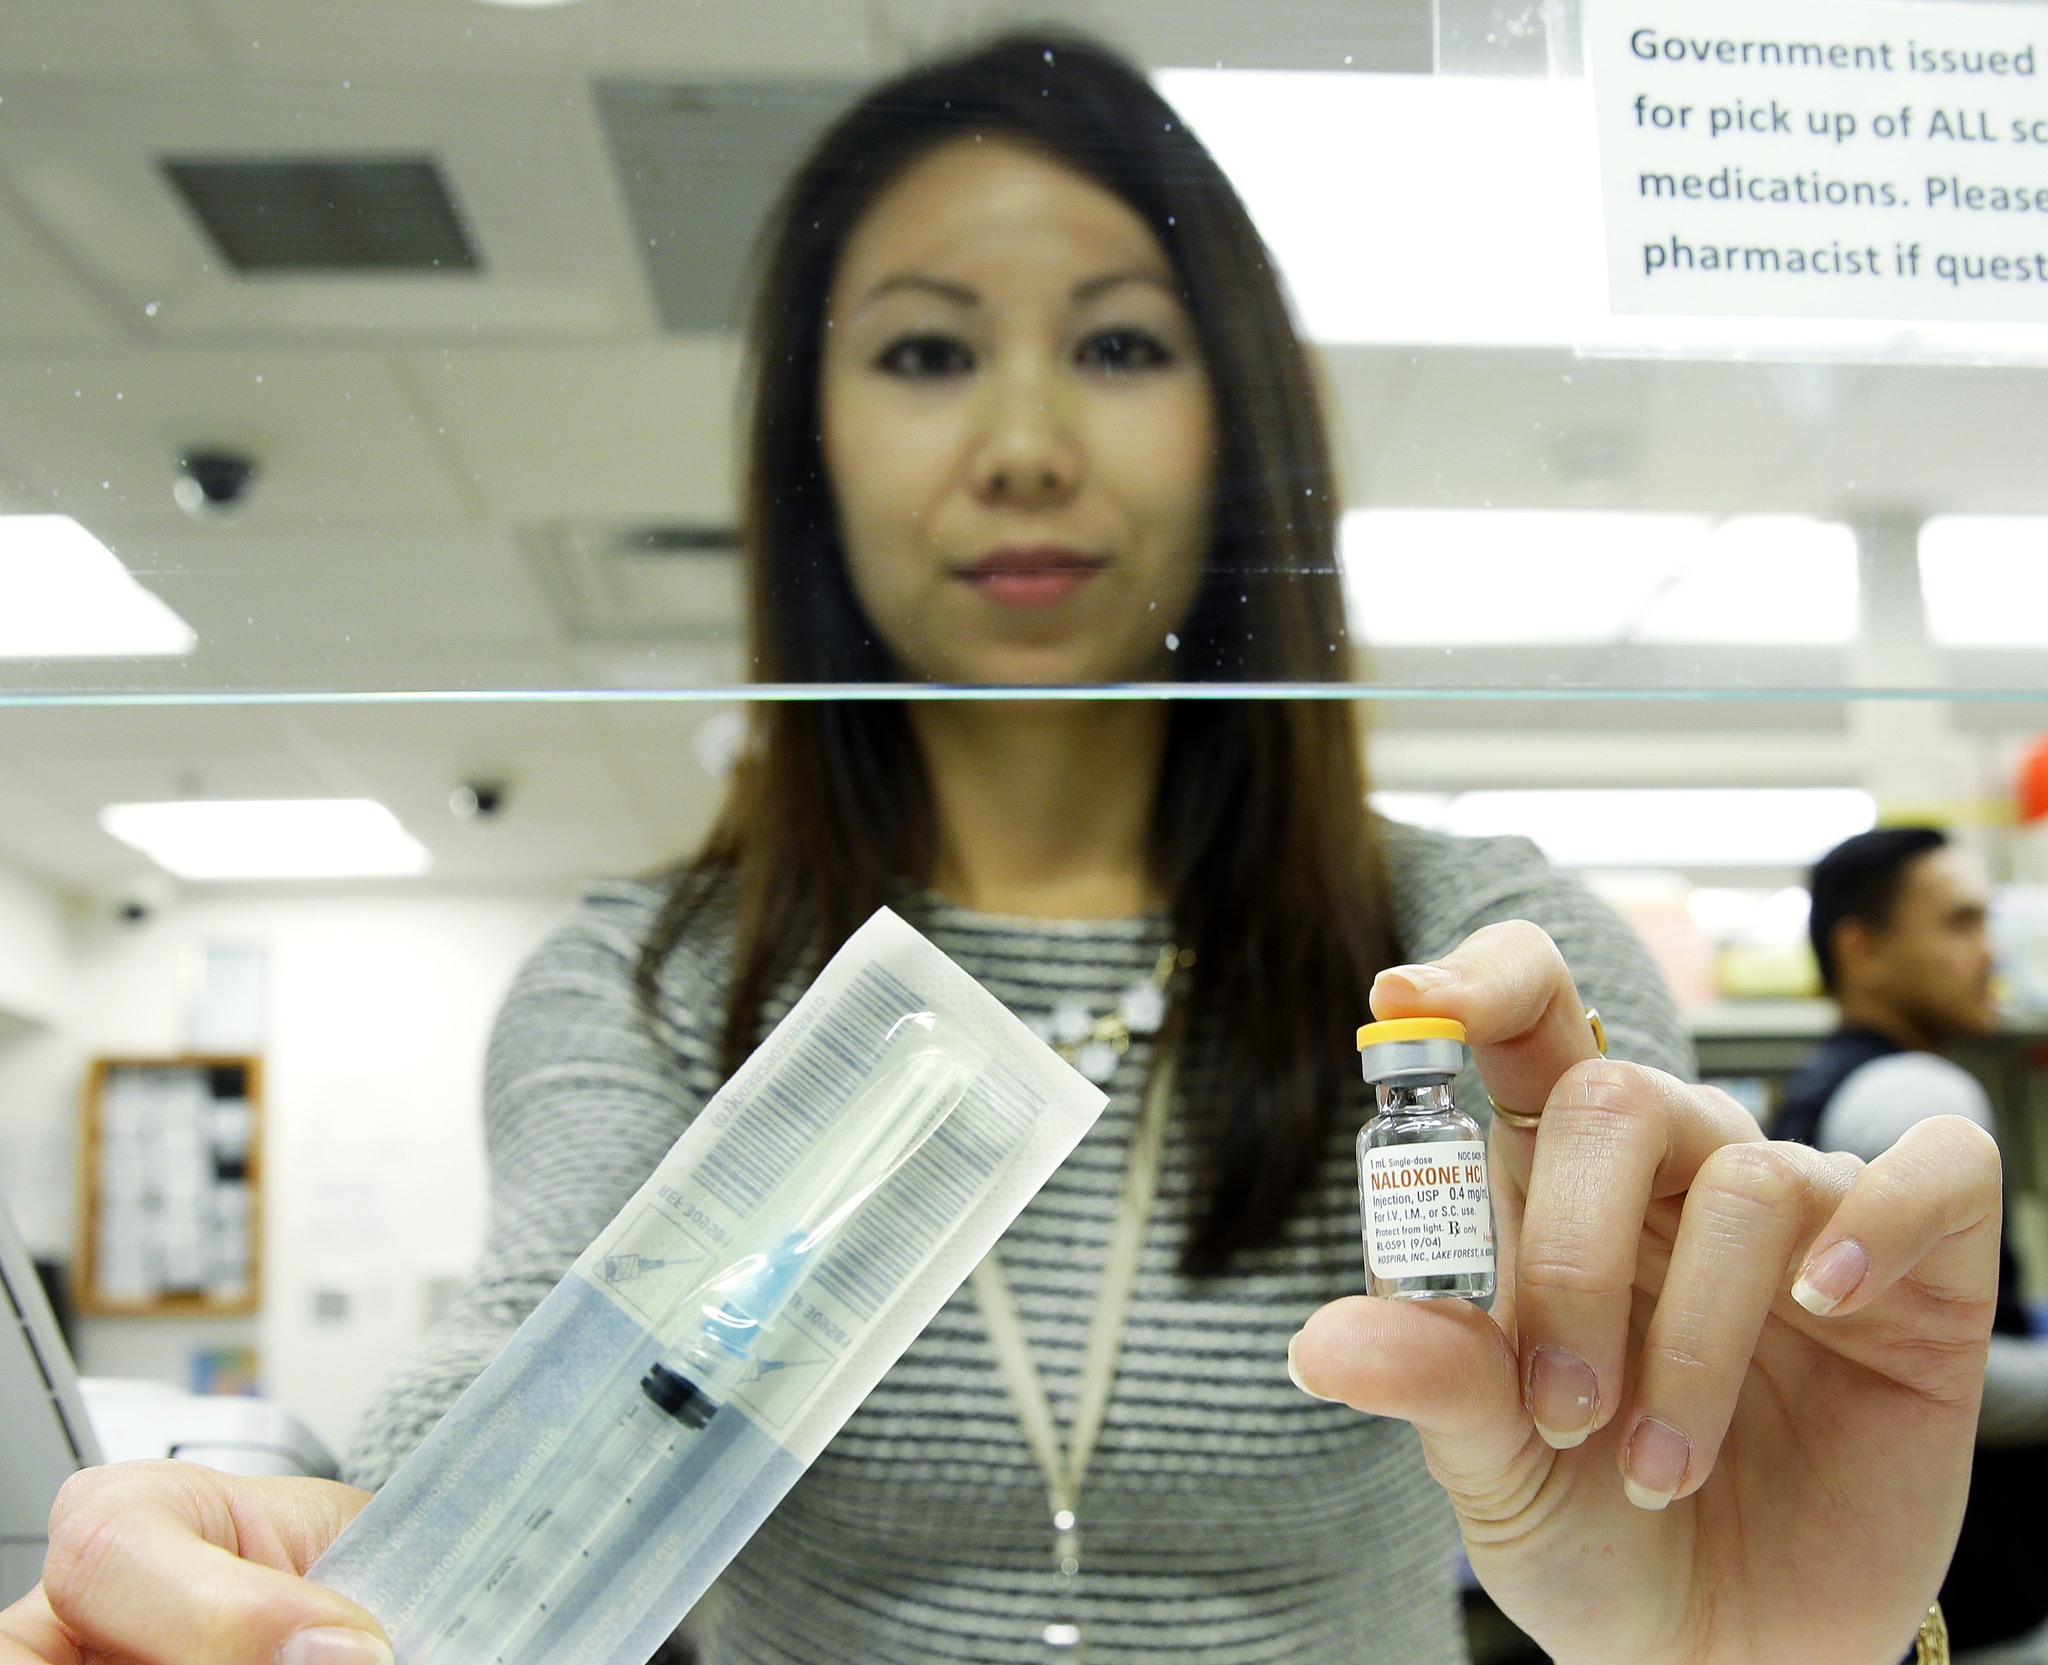 Tess Nishida, a pain pharmacist at the University of Washington, poses for a photo Friday holding a vial of Naloxone, which can be used to block the potentially fatal effects of an opioid overdose, at an outpatient pharmacy at the university. (Ted S. Warren/The Associated Press)